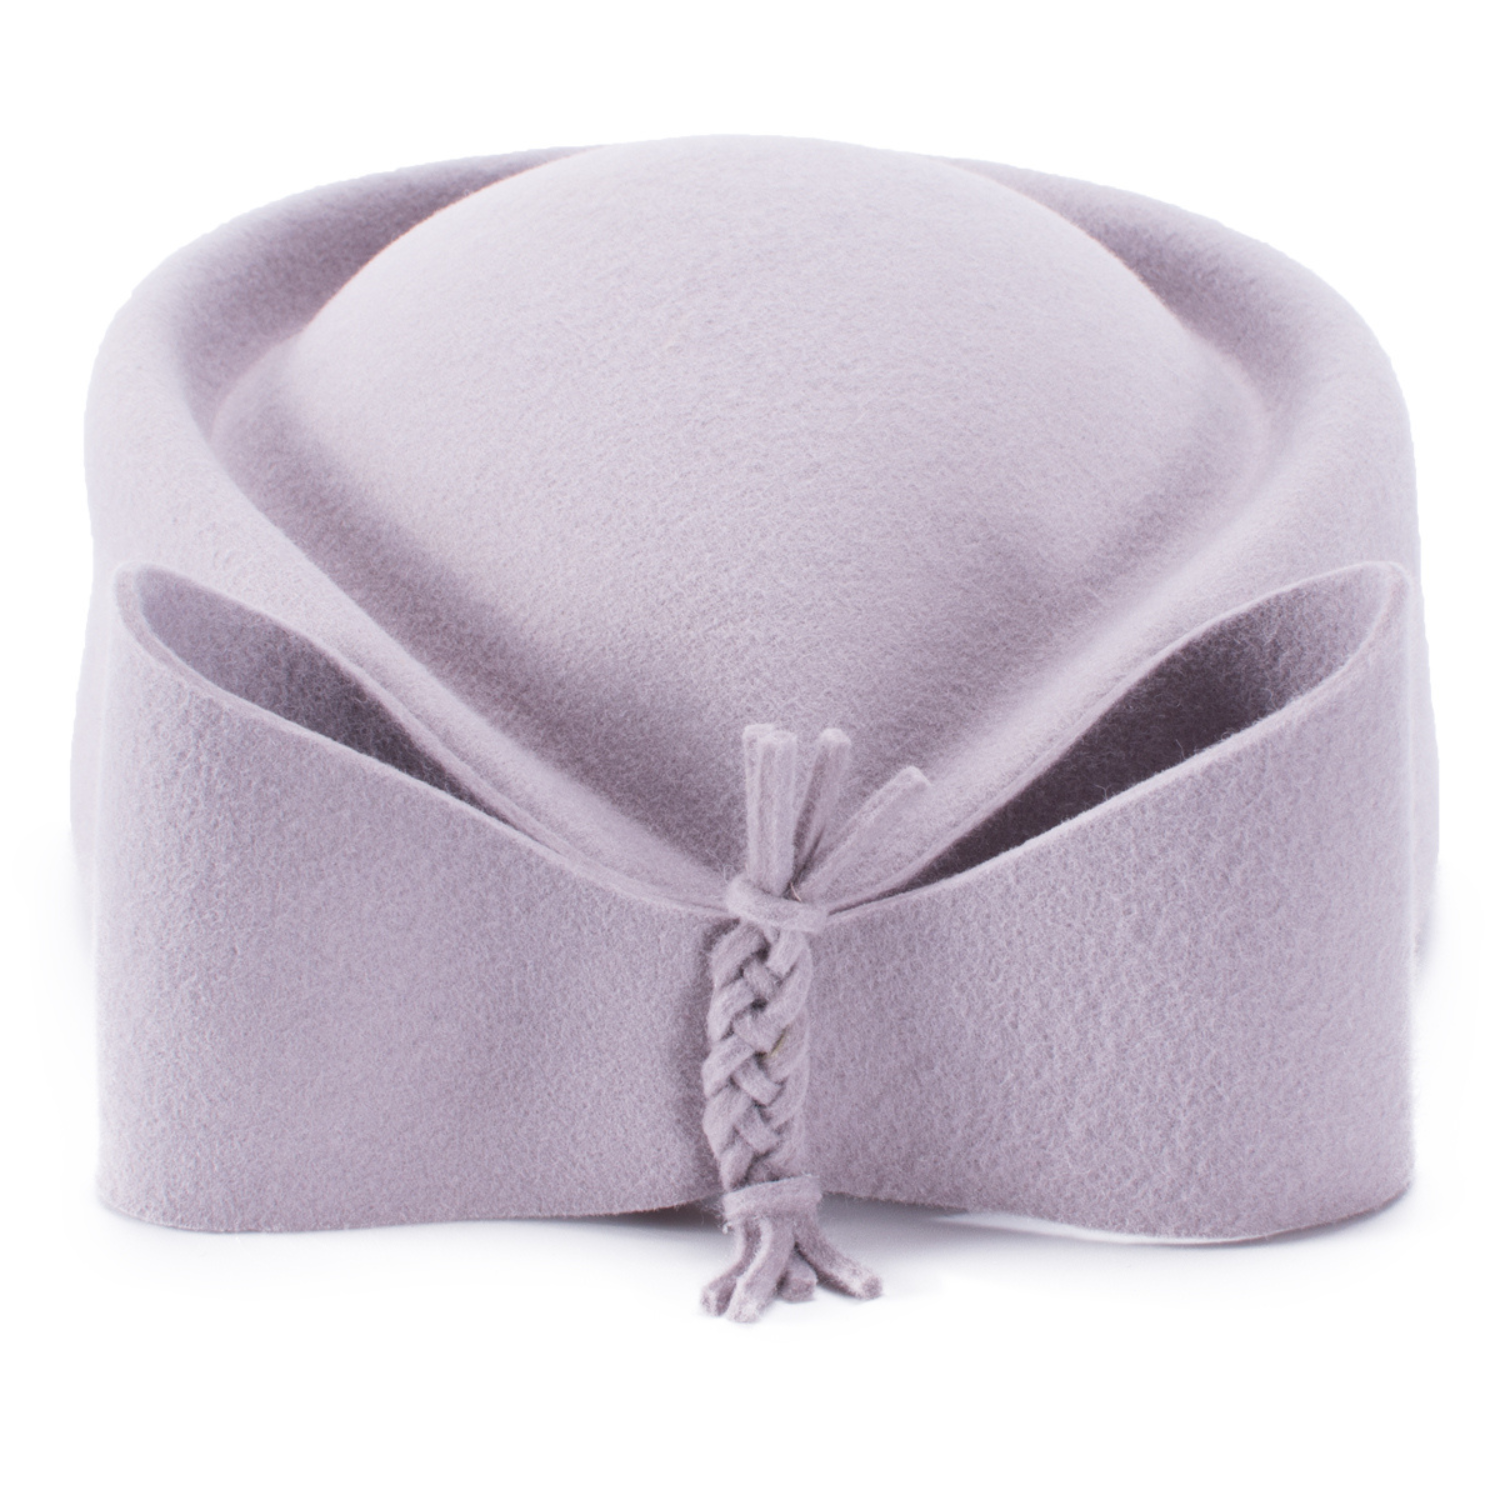 Pillbox hat with a bow 100% wool